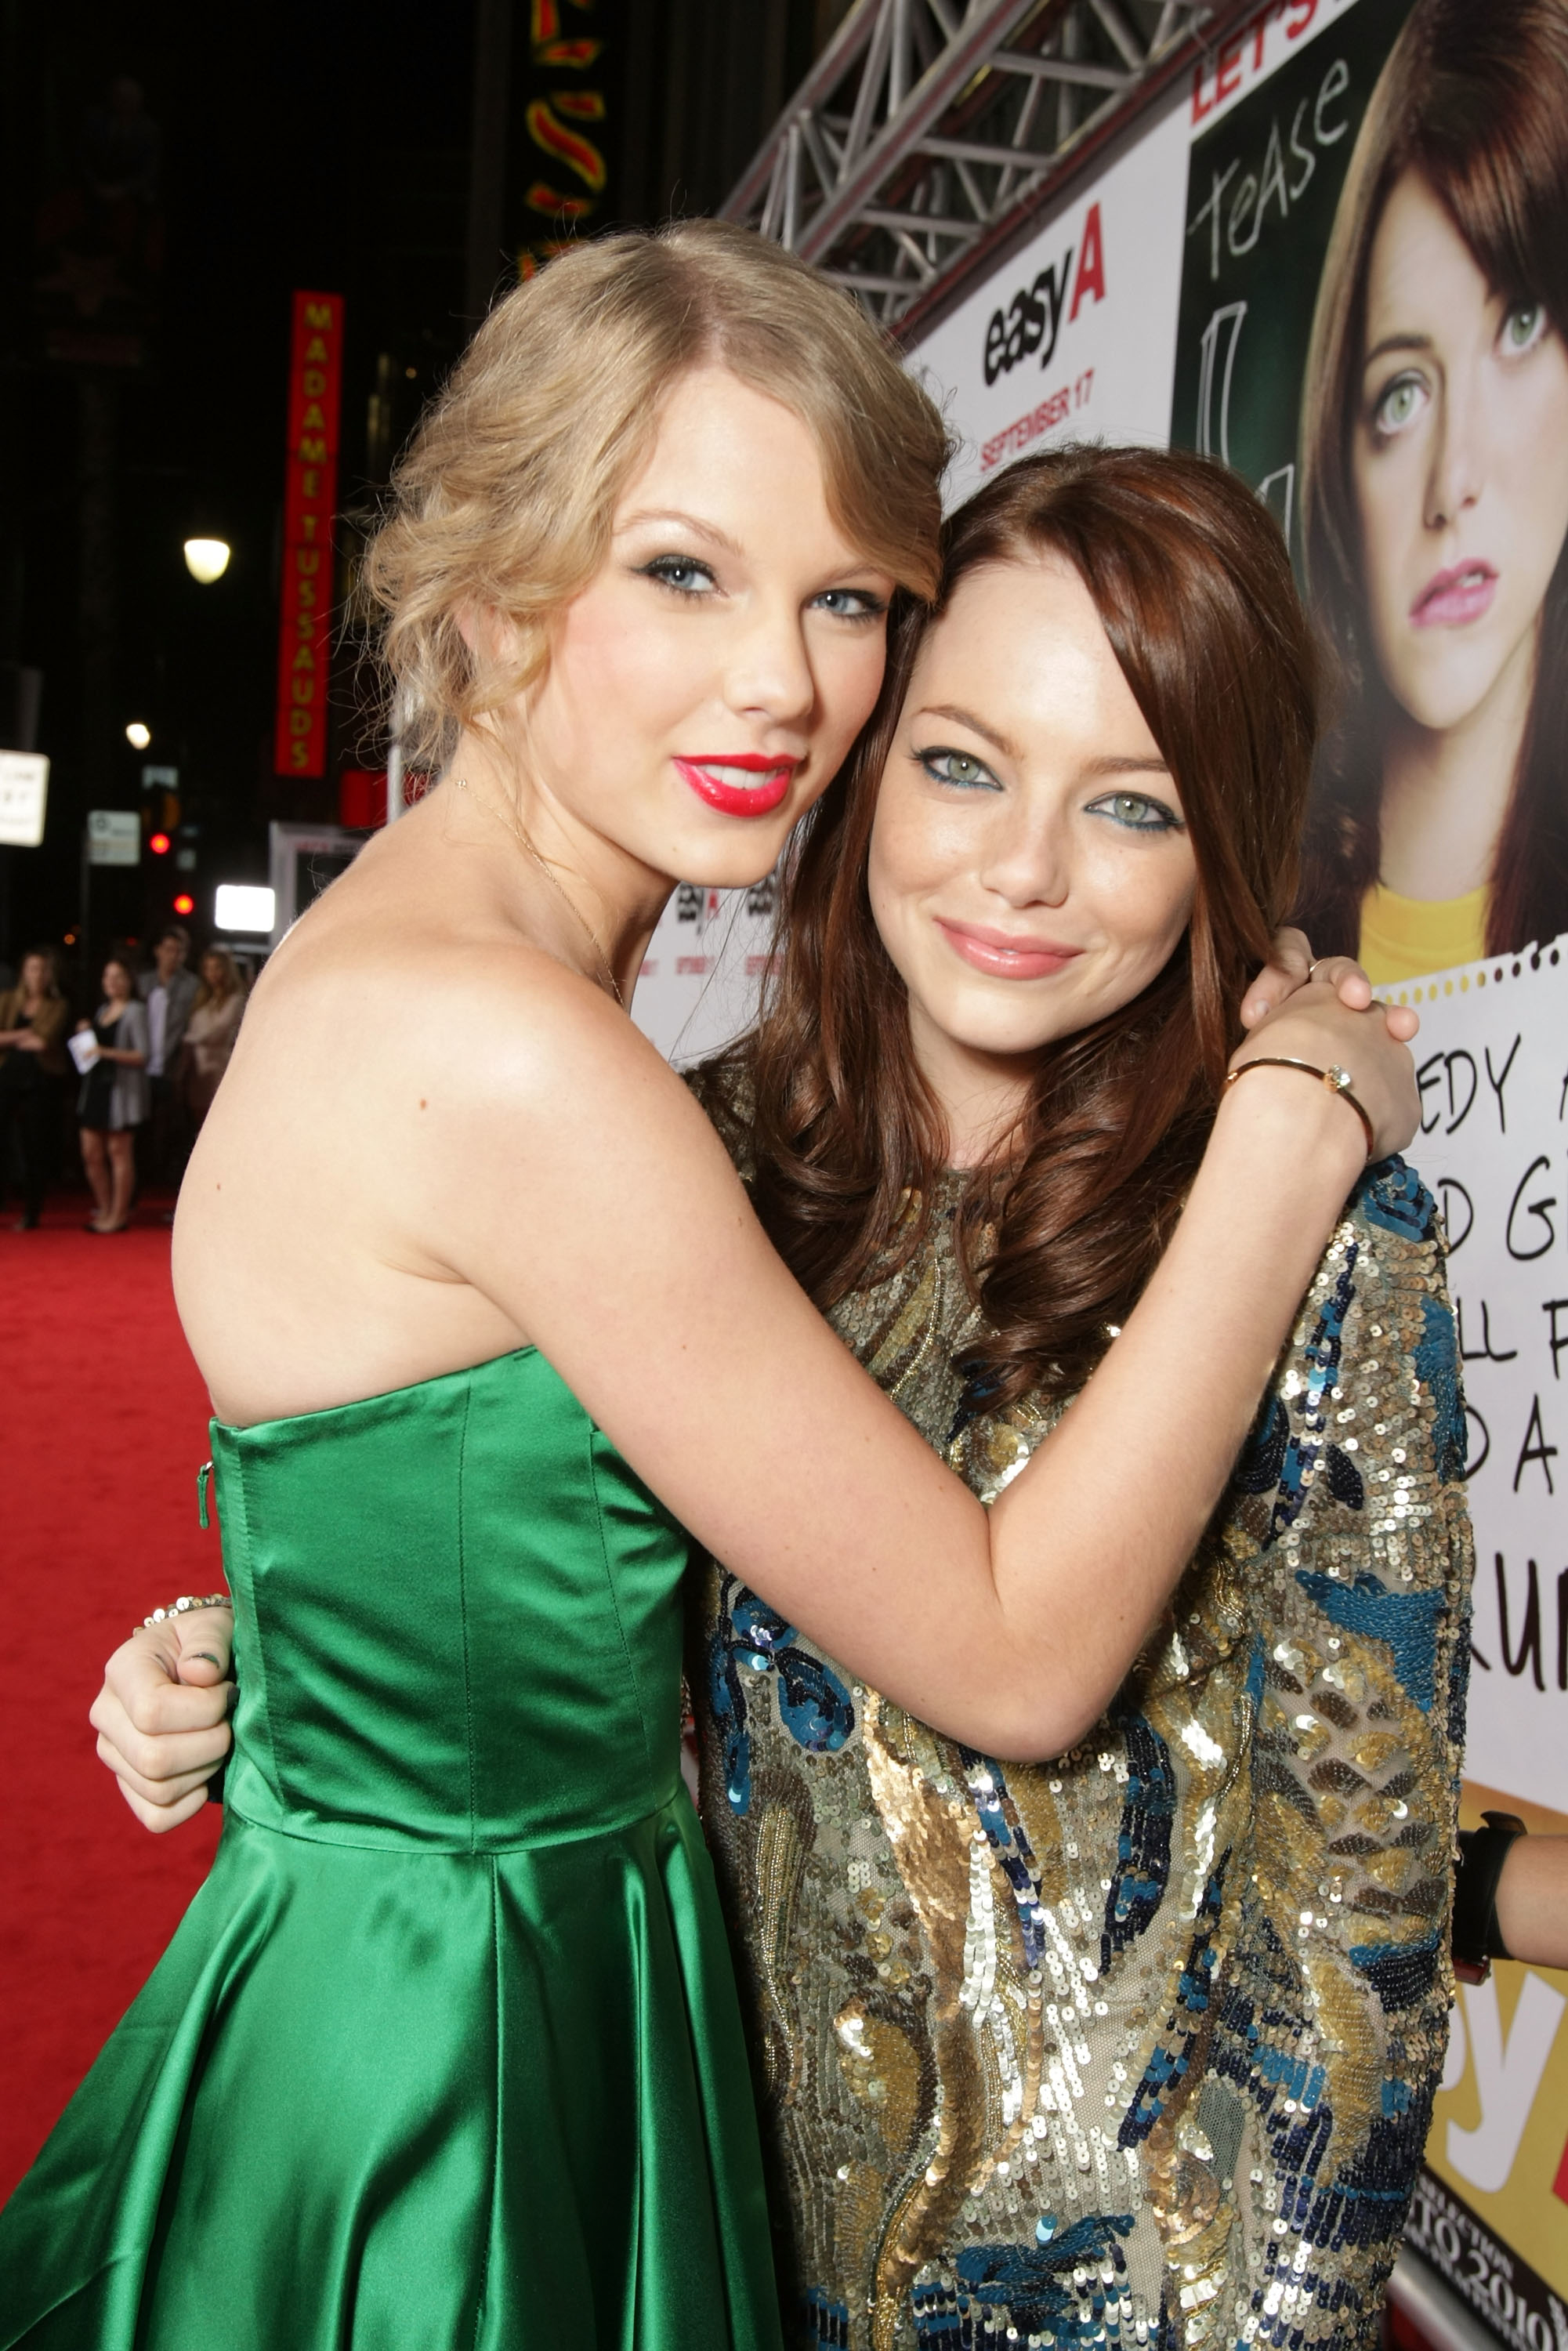 Taylor Swift wearing a green dress, Emma Stone in a sequined outfit, smiling together on the red carpet